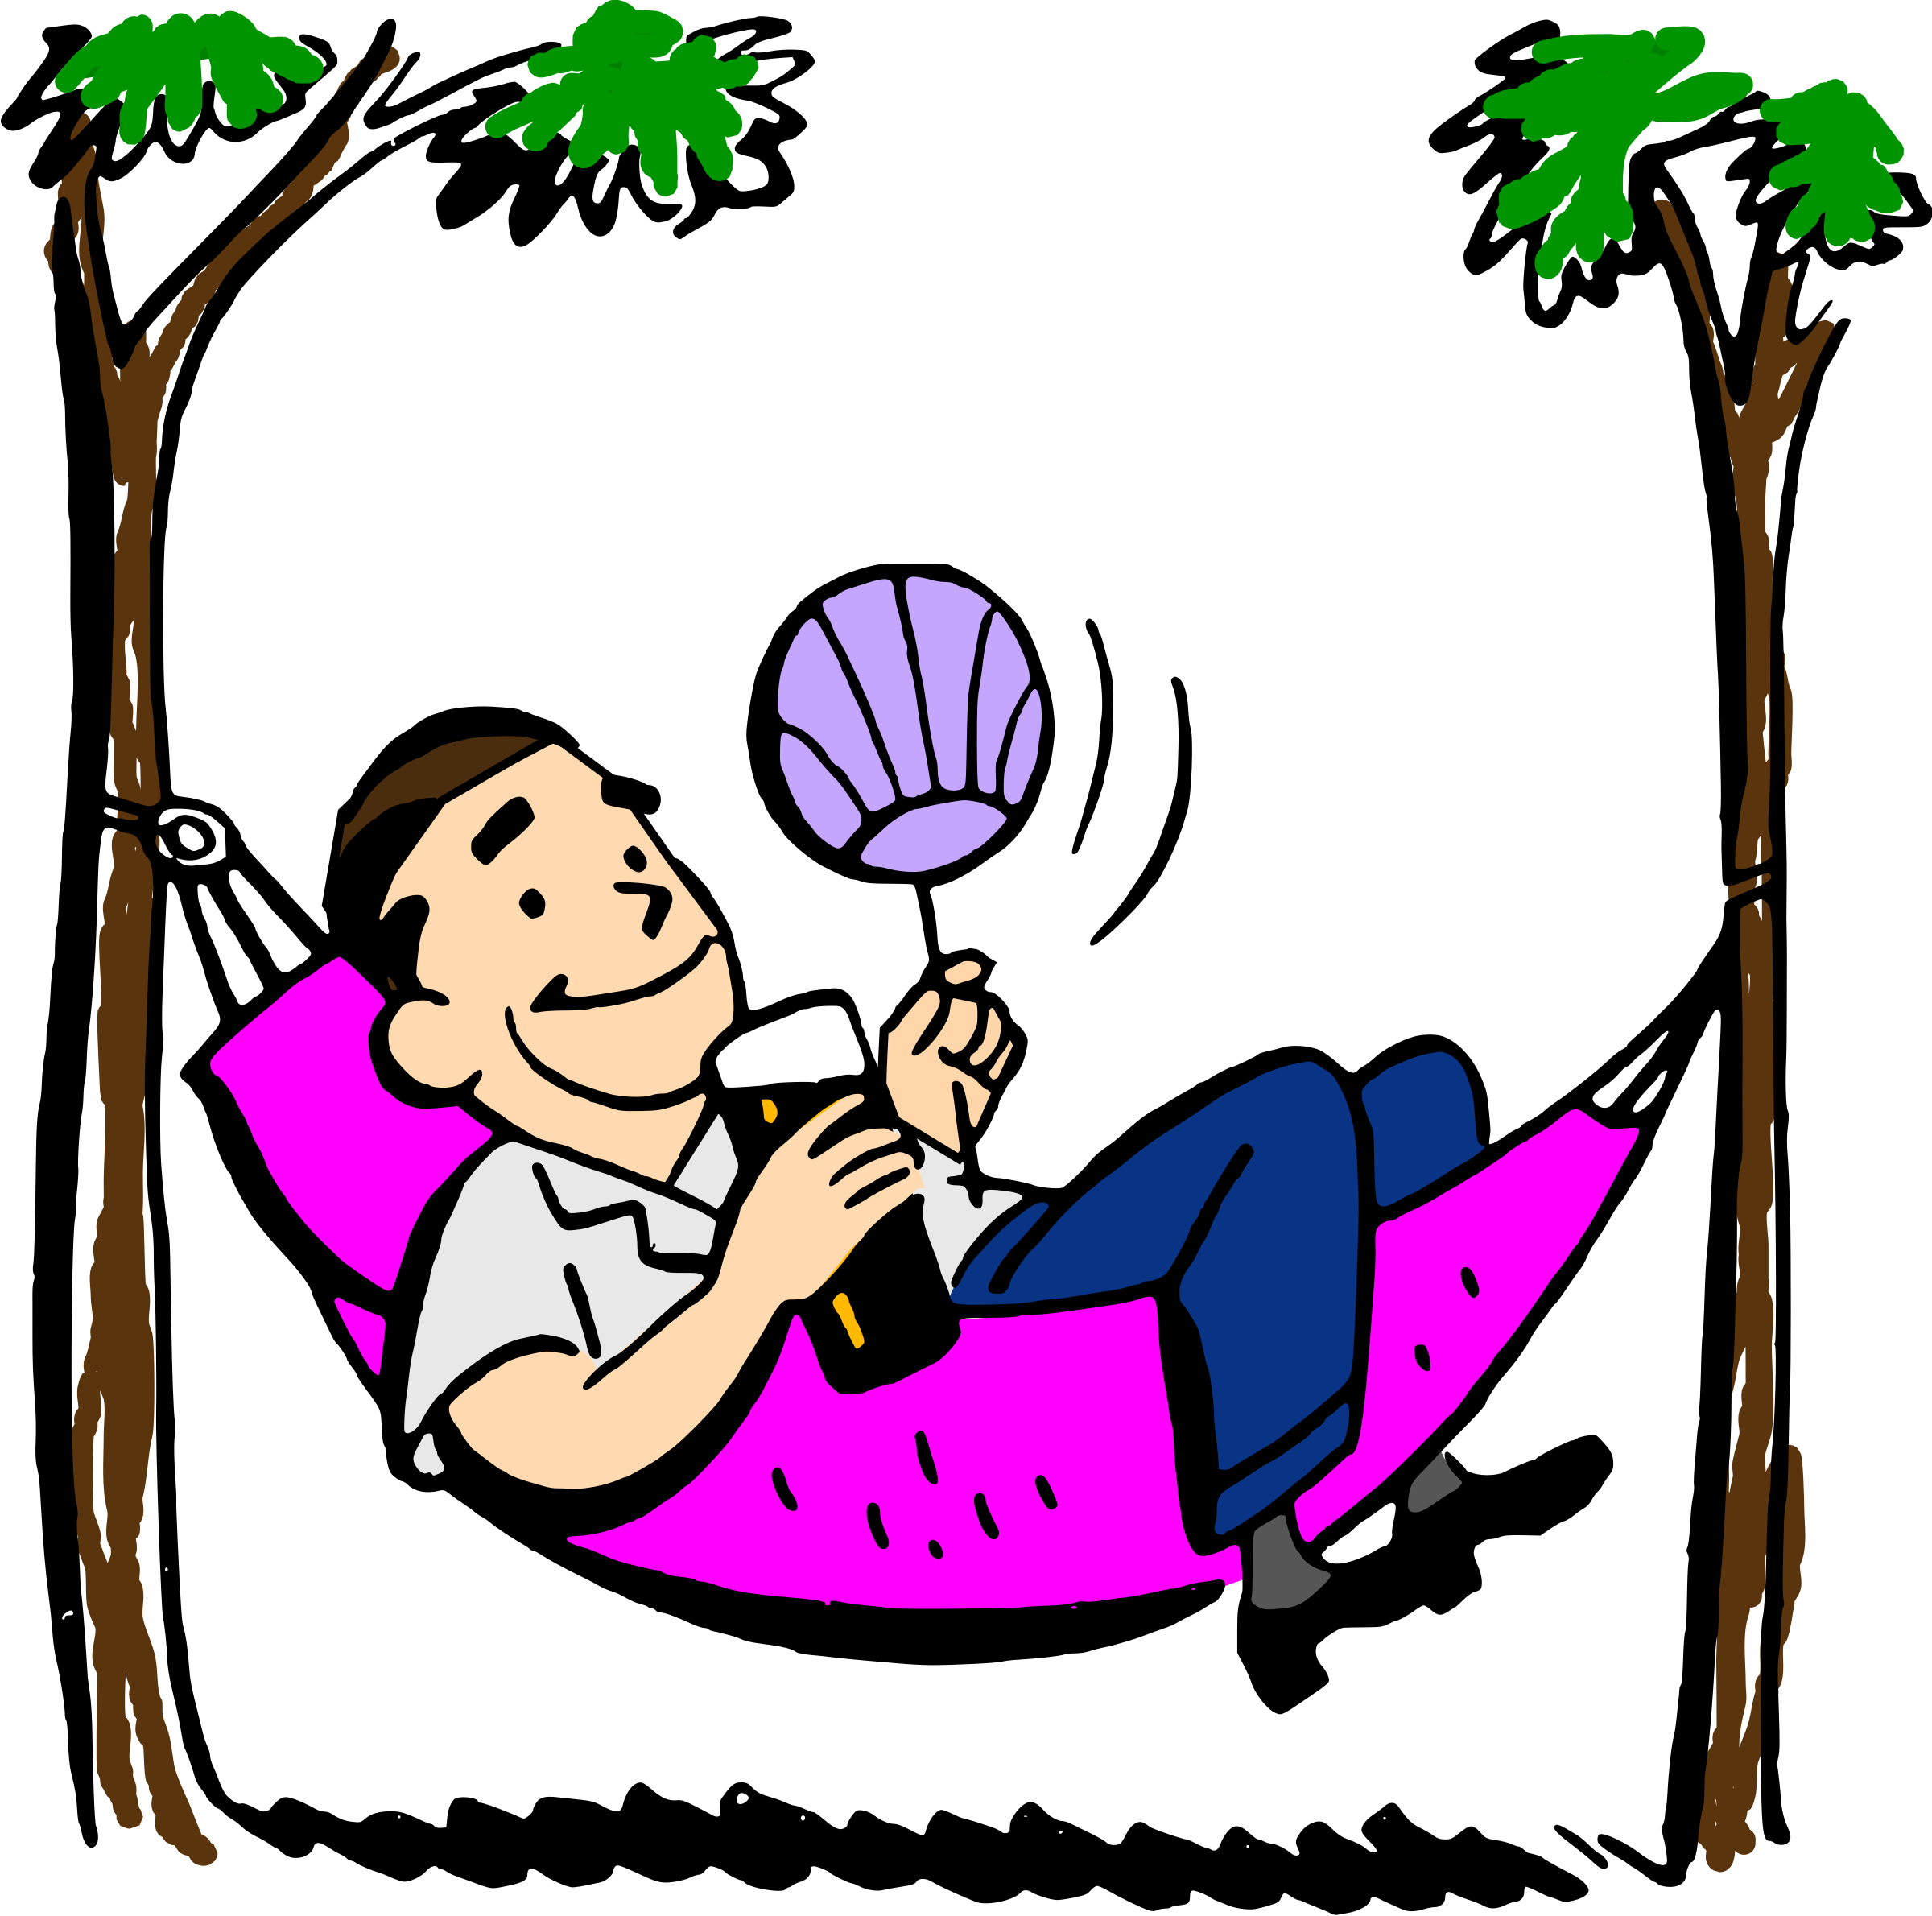 hammock black and white clipart - Clip Art Library.